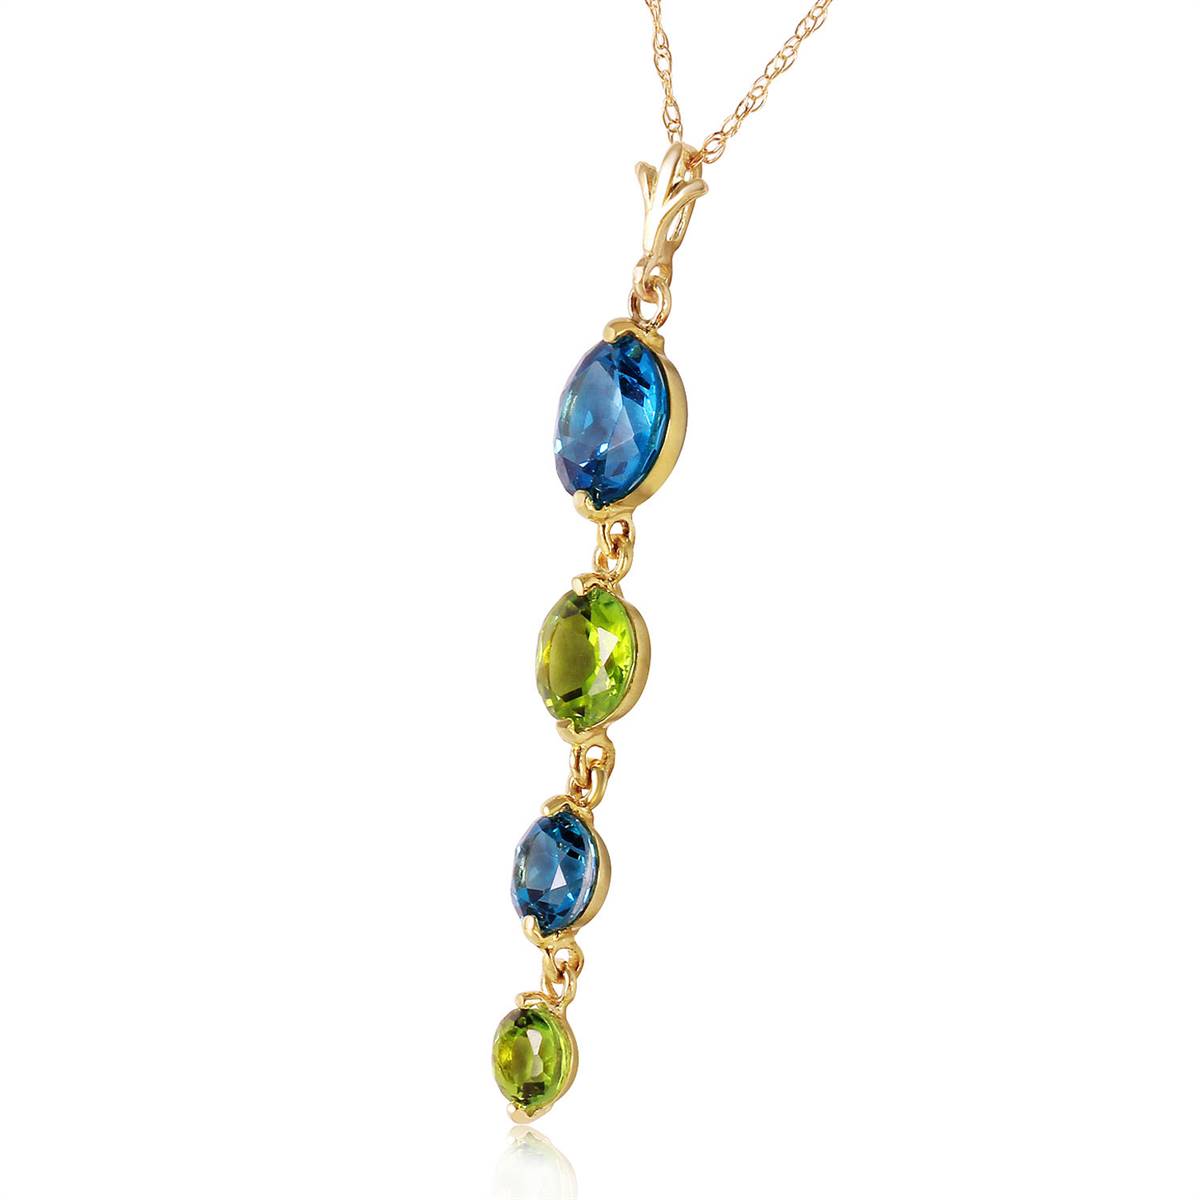 3.9 Carat 14K Solid Yellow Gold Grass Is Singing Blue Topaz Peridot Necklace